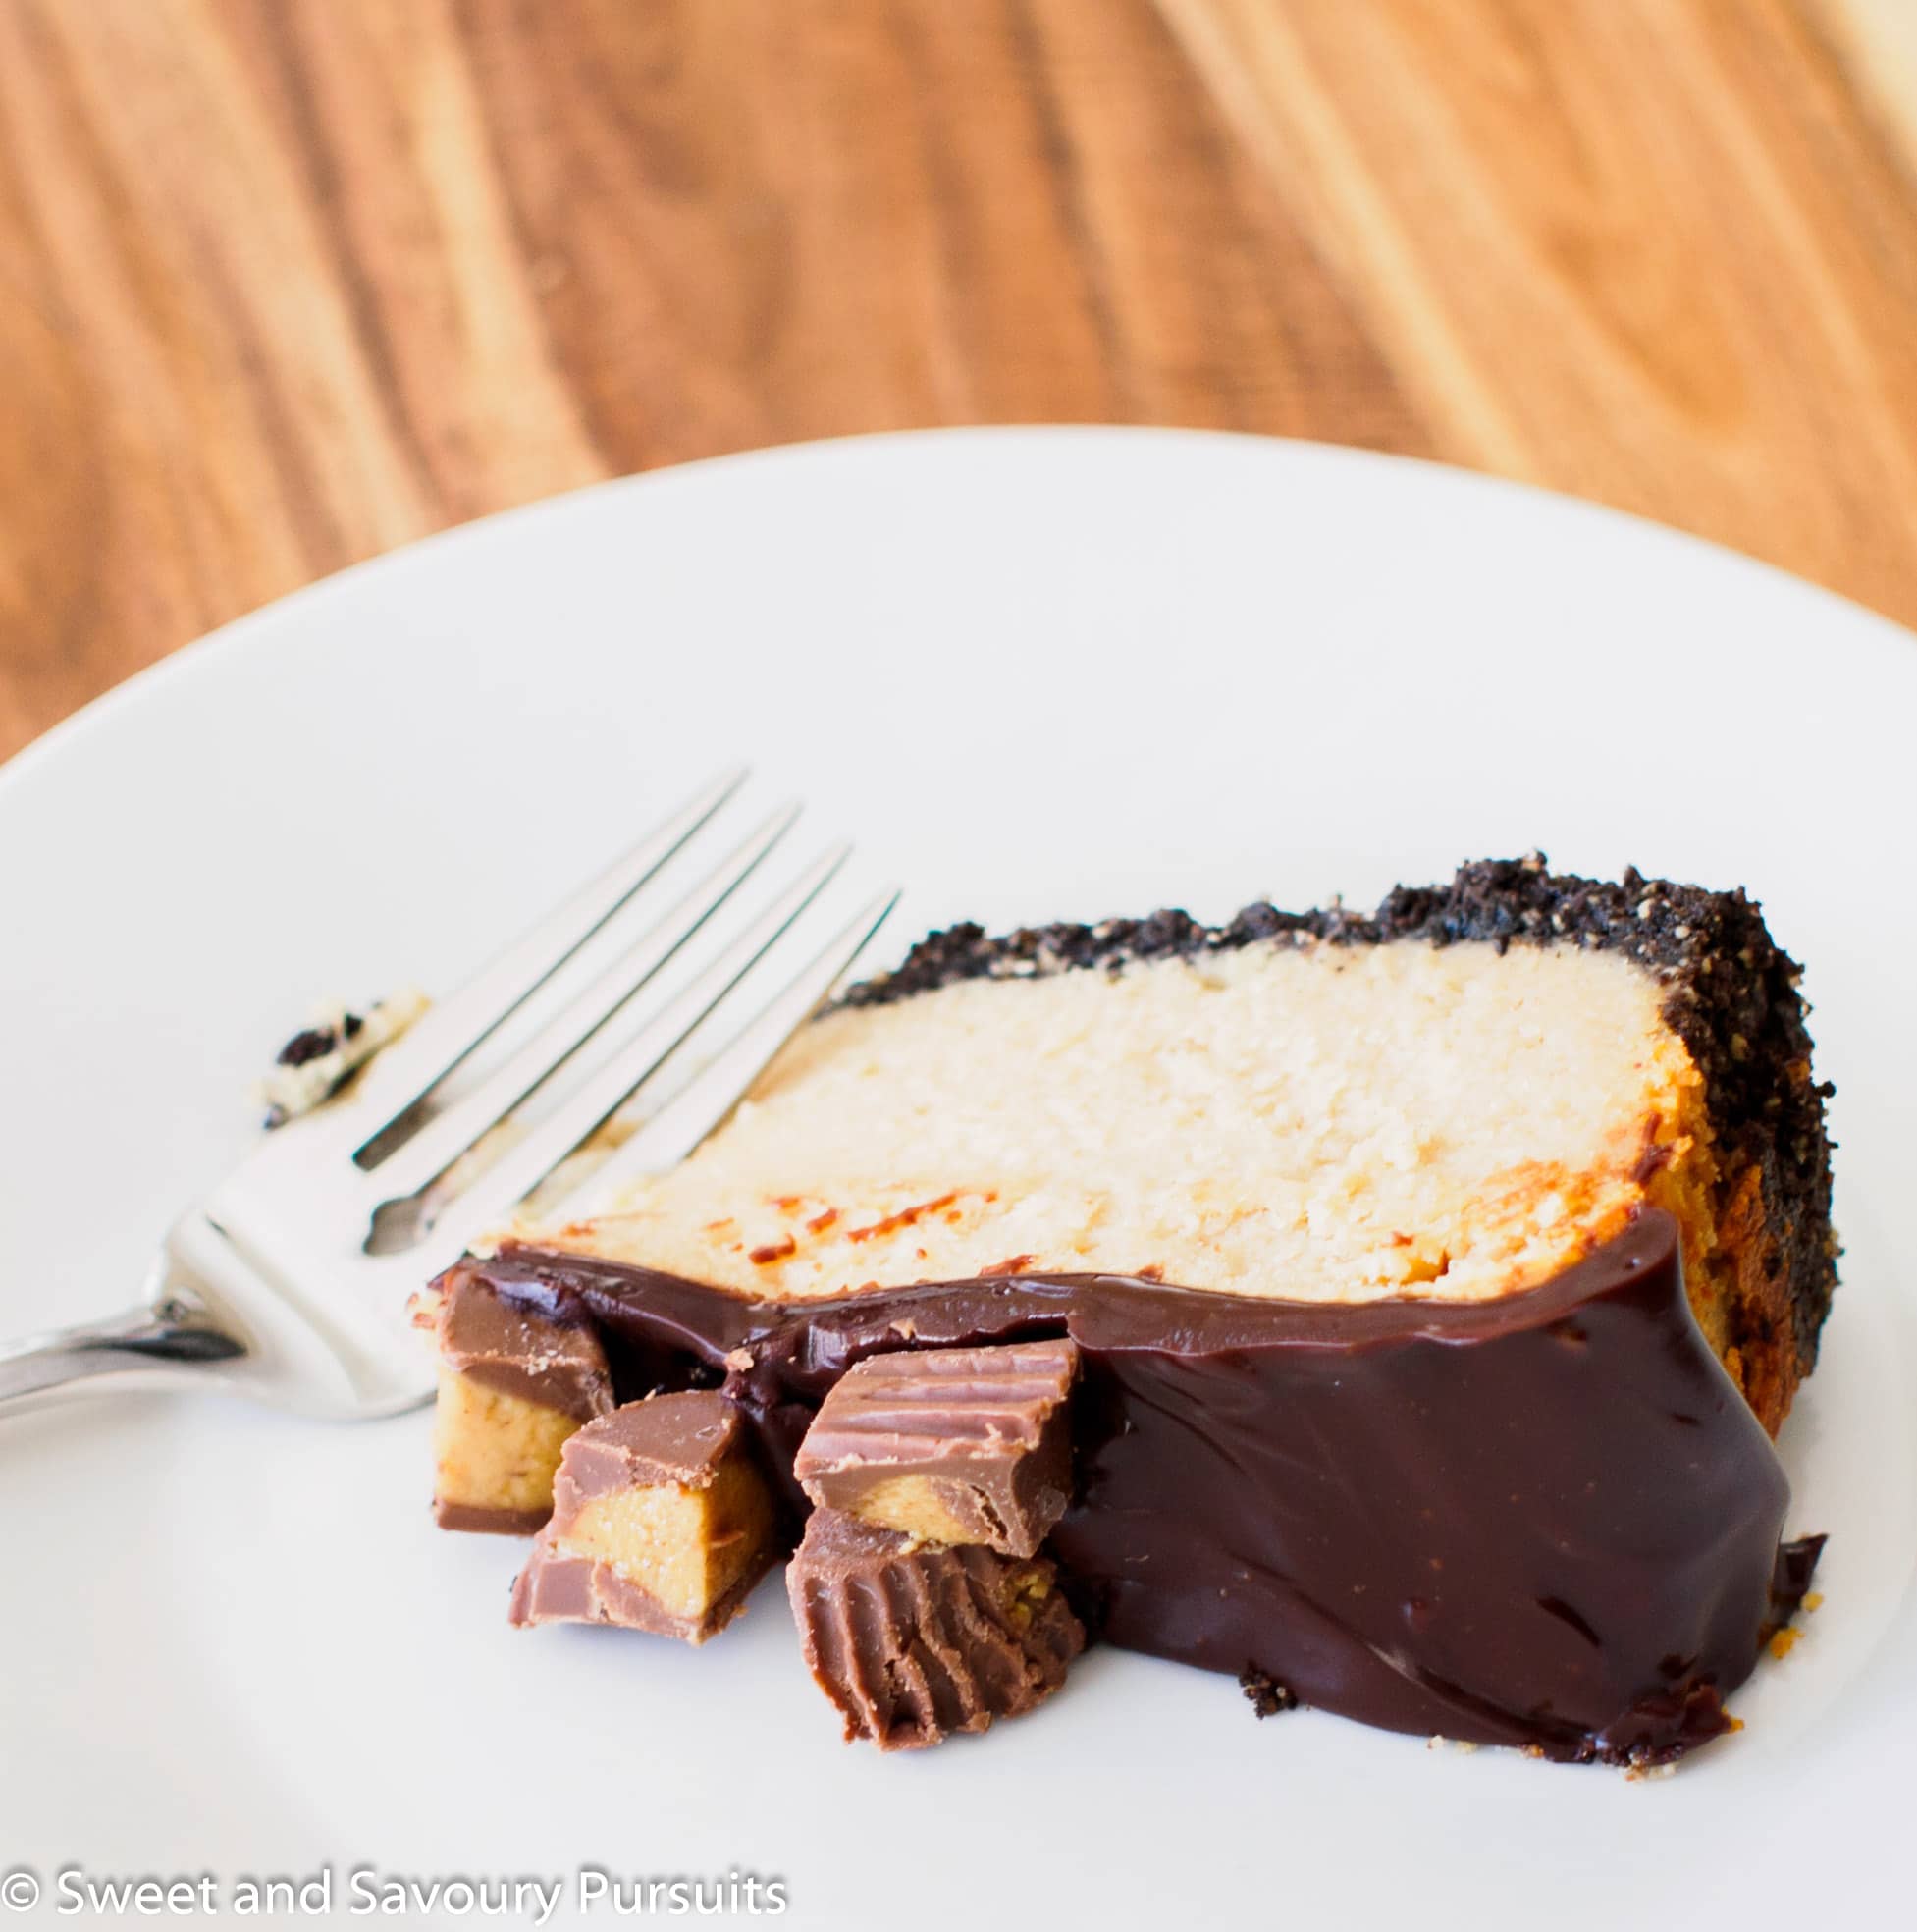 Slice of peanut butter and chocolate cheesecake.